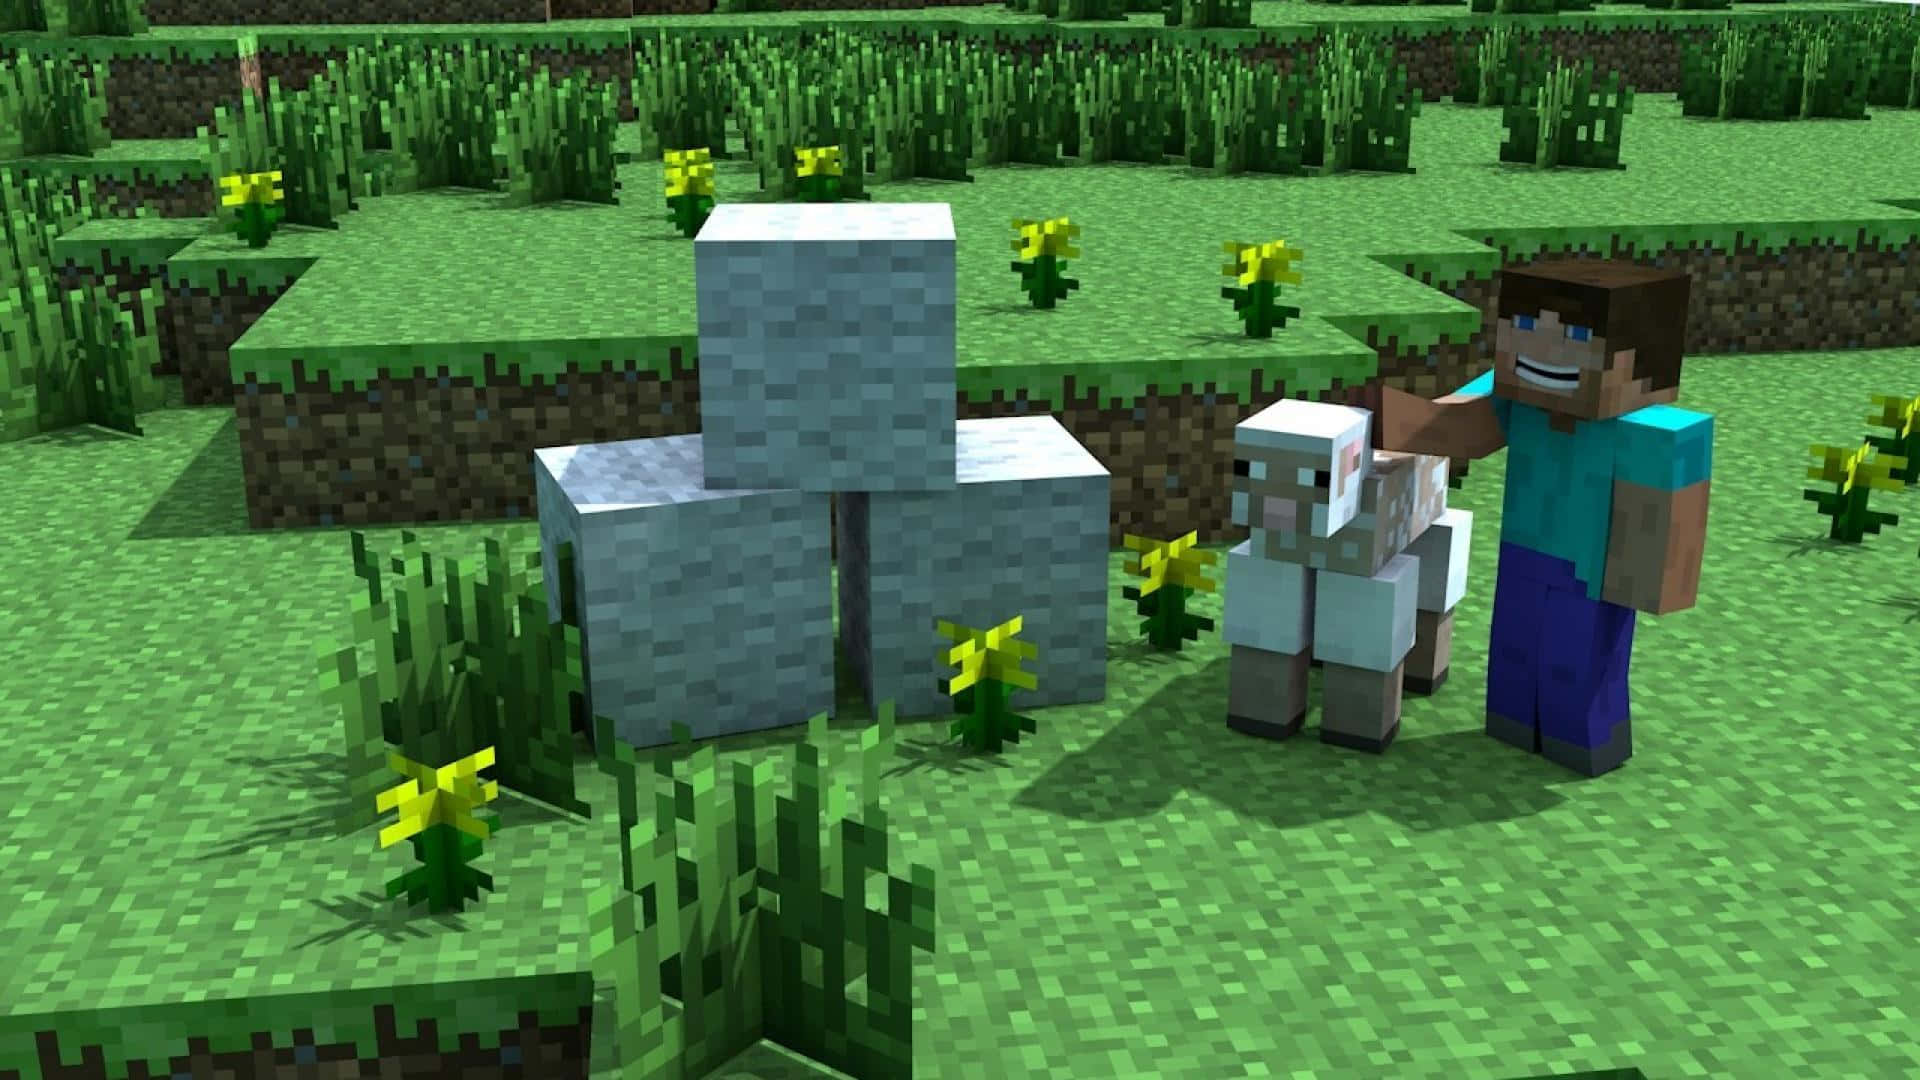 A Minecraft Sheep grazing in a lush green meadow Wallpaper